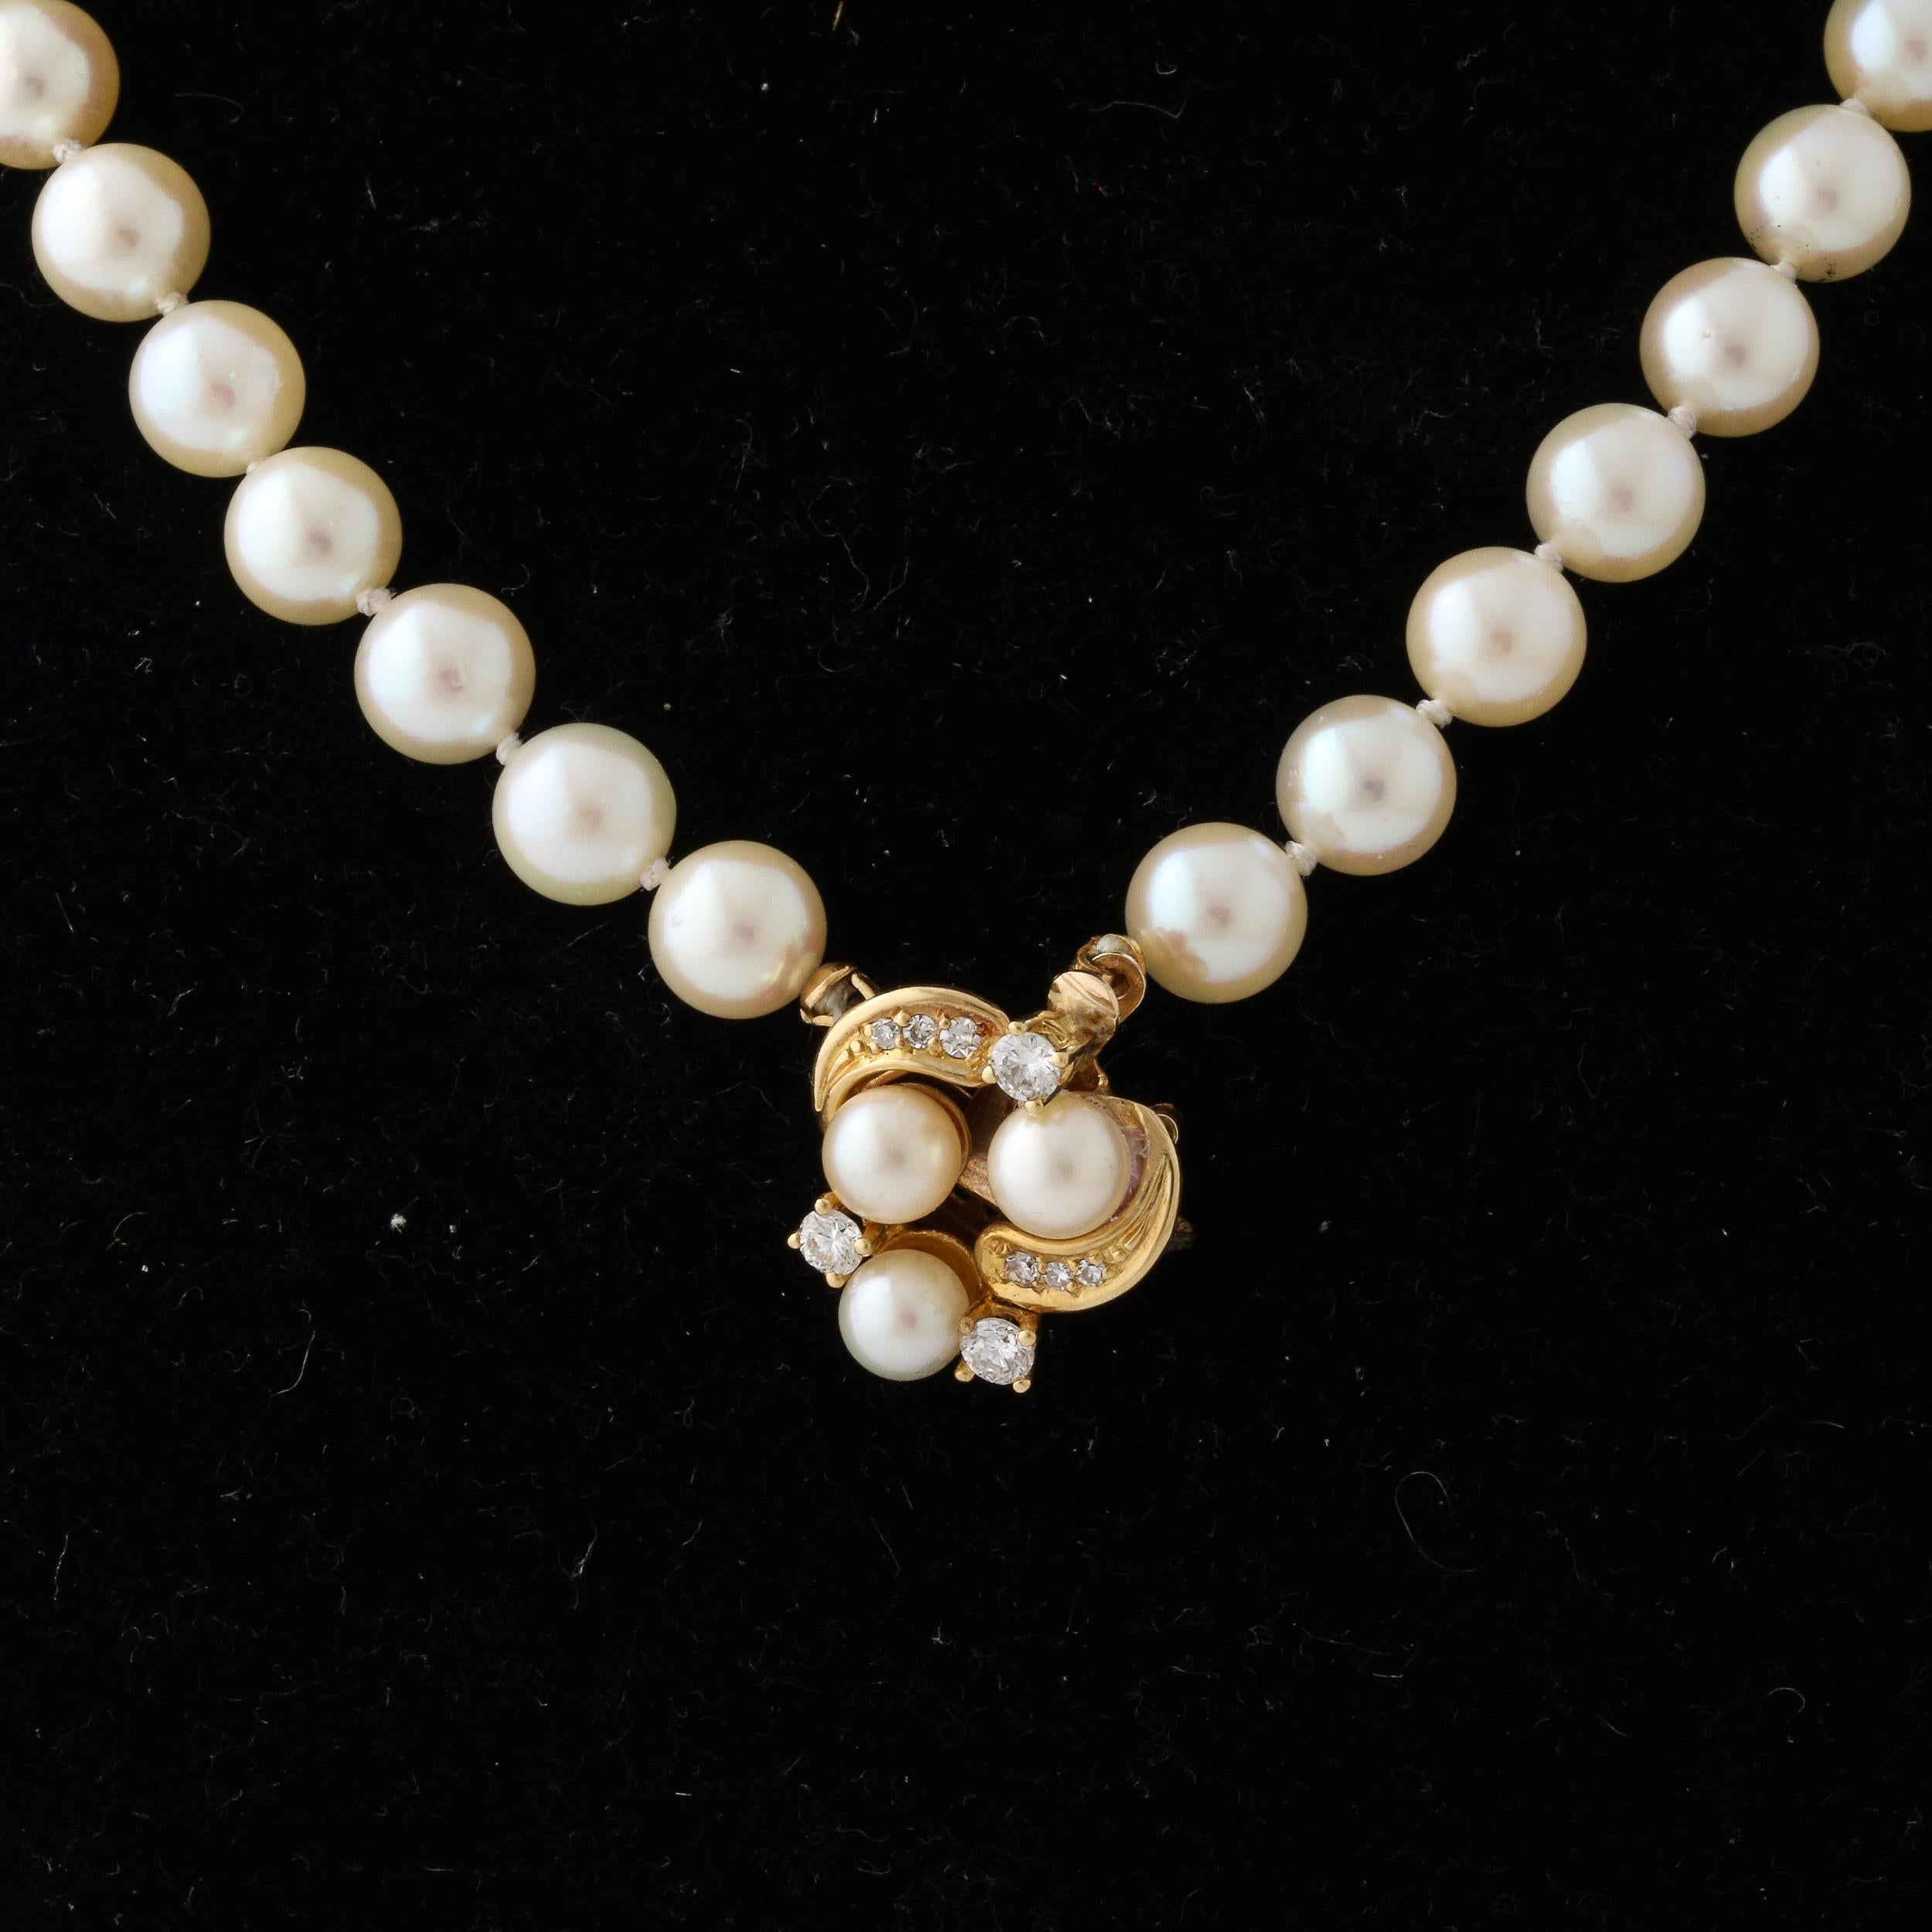 Brilliant Cut Modernist Pearl Necklace with 14k  Gold , Diamond and Pearl Clasp 